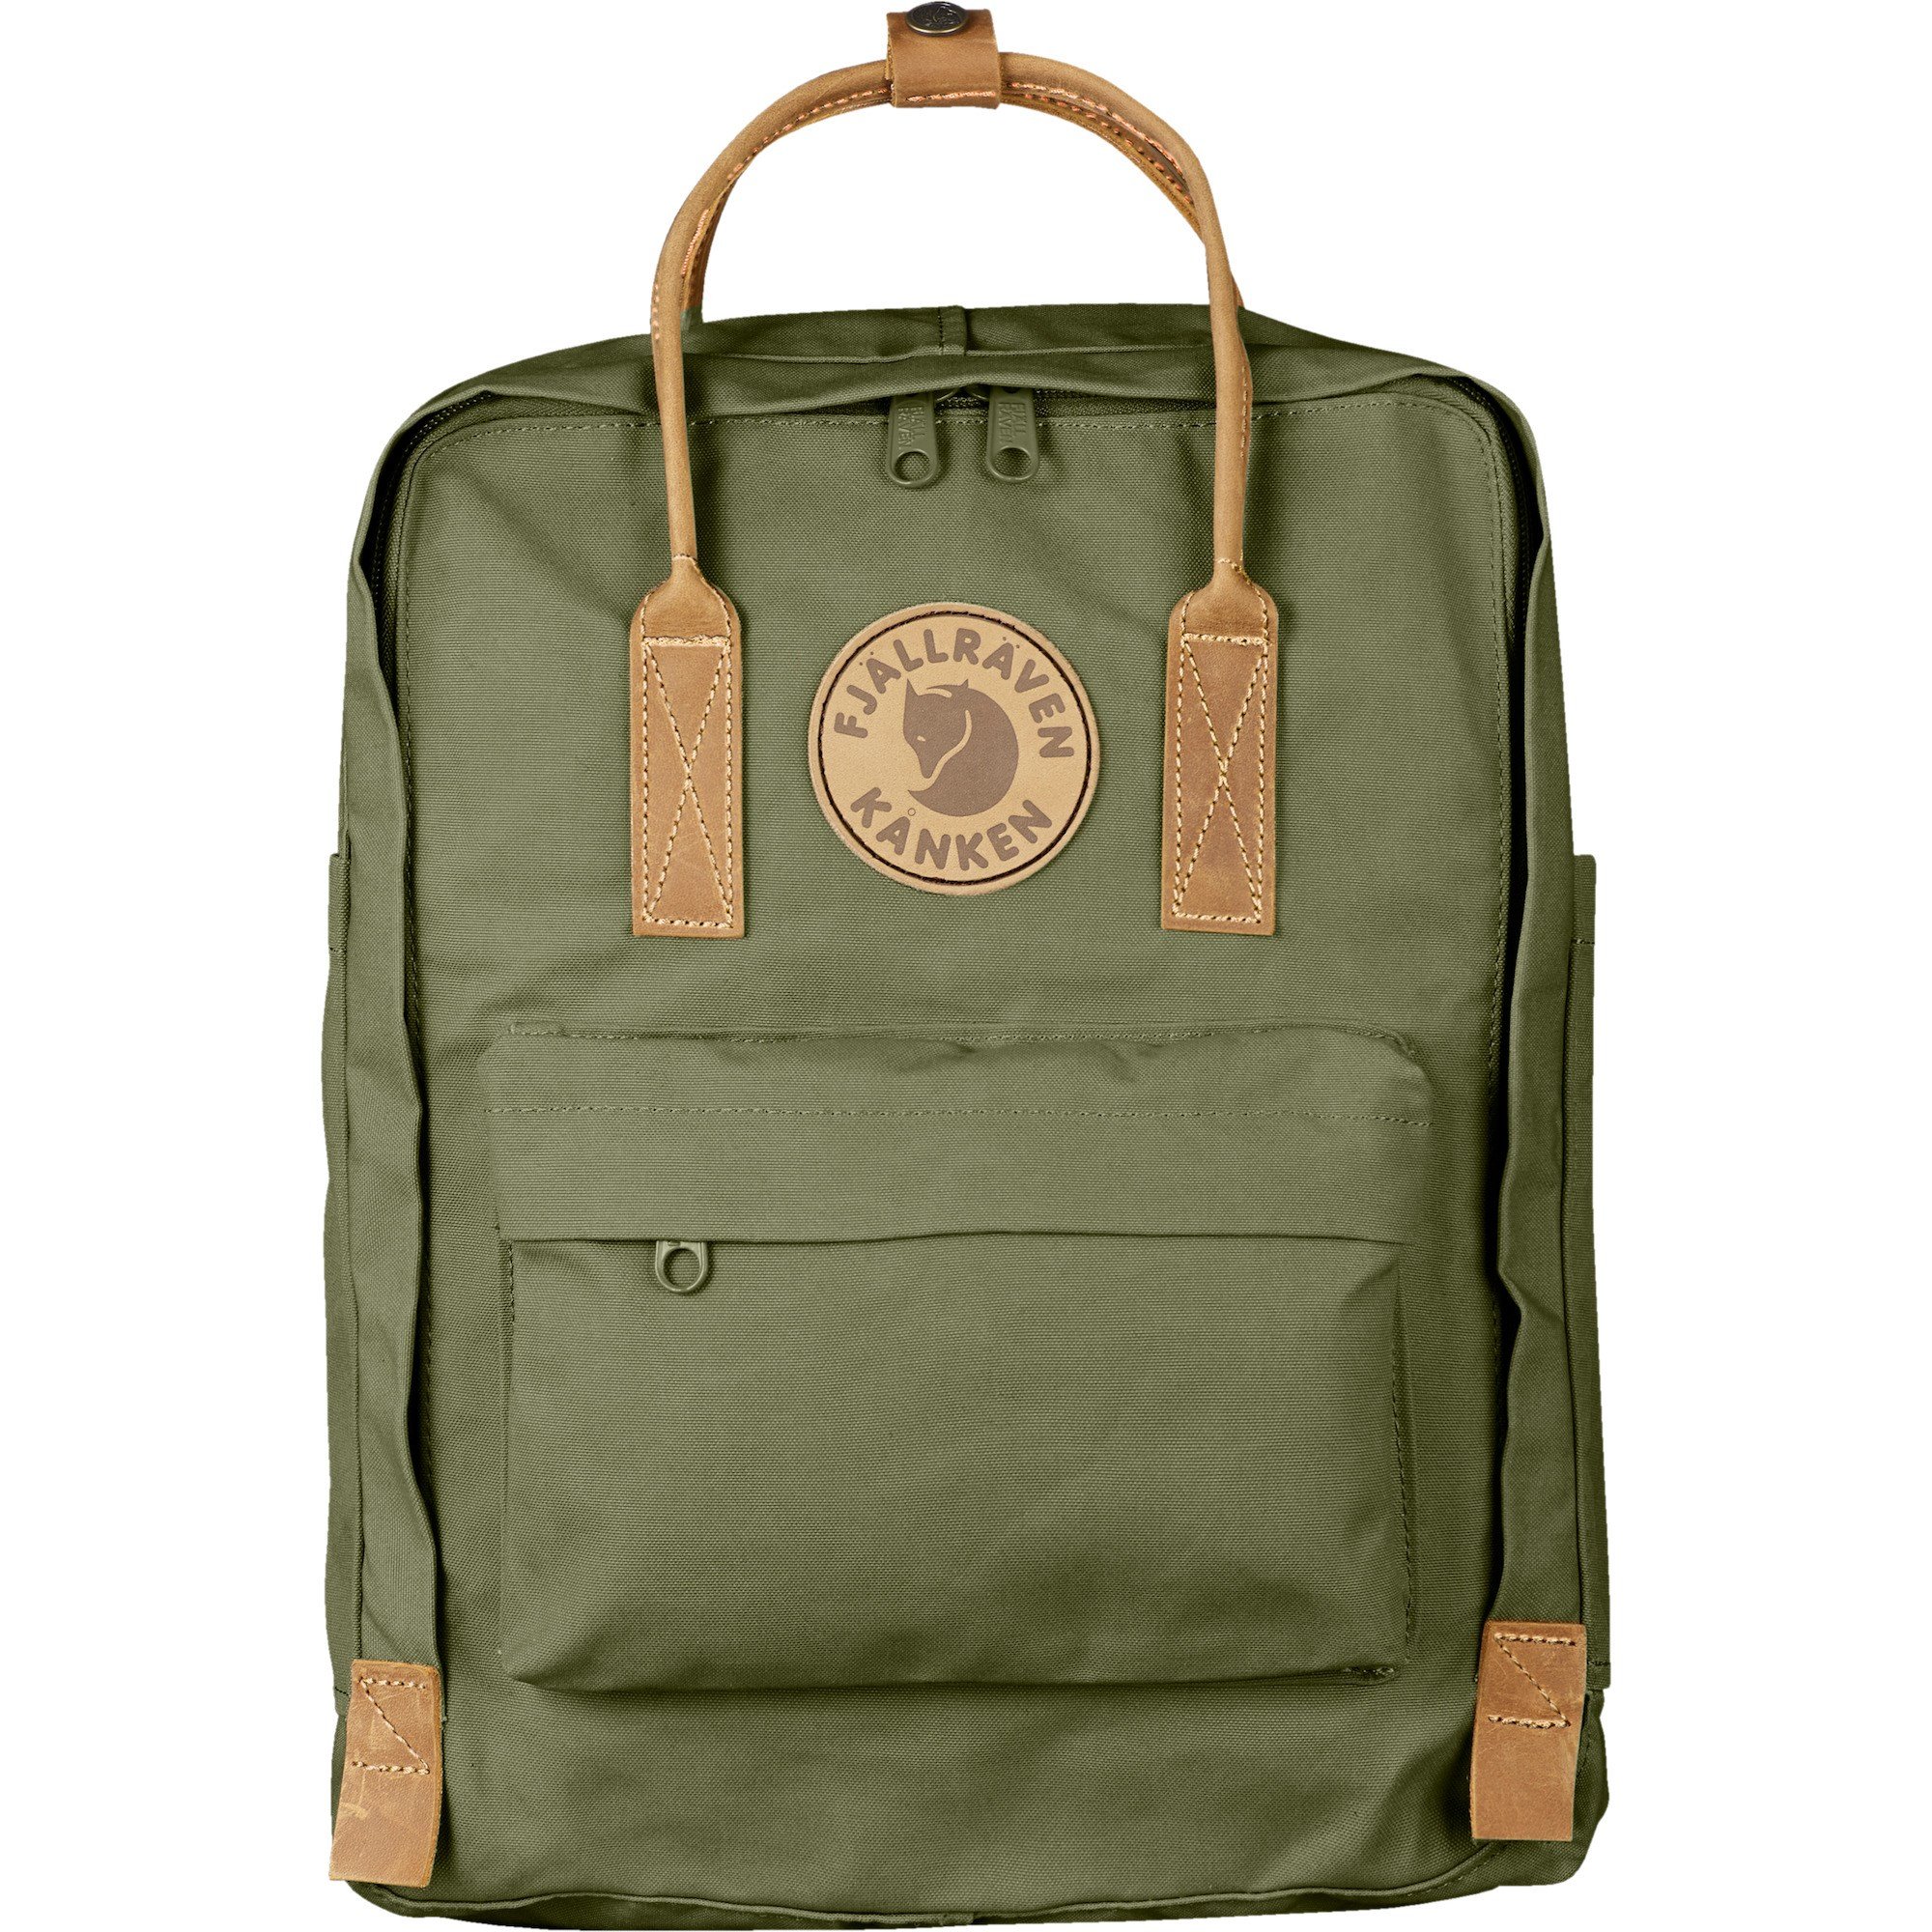 FJALLRAVEN KANKEN NO.2 Double Wax Heavy Duty Leather Backpack 16L 8 colors